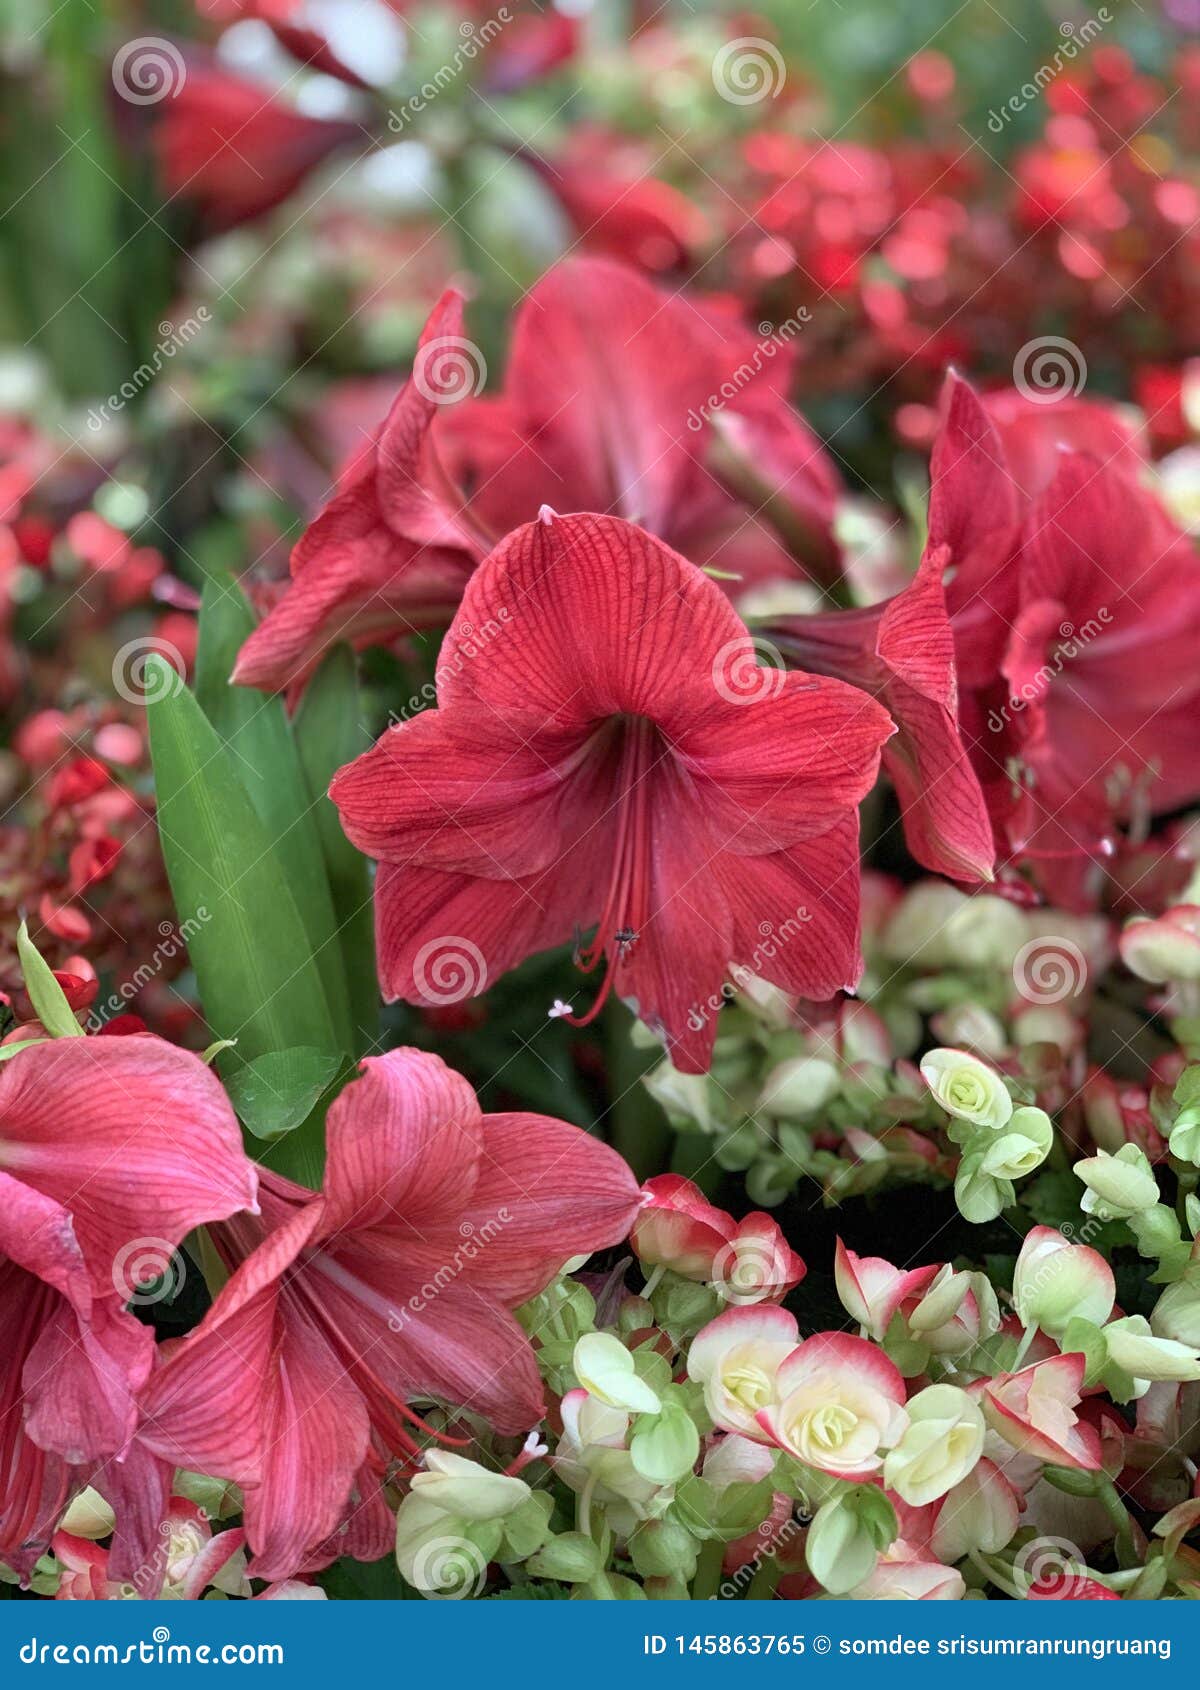 Red Flowers Are Blooming Stock Image Image Of Green 145863765